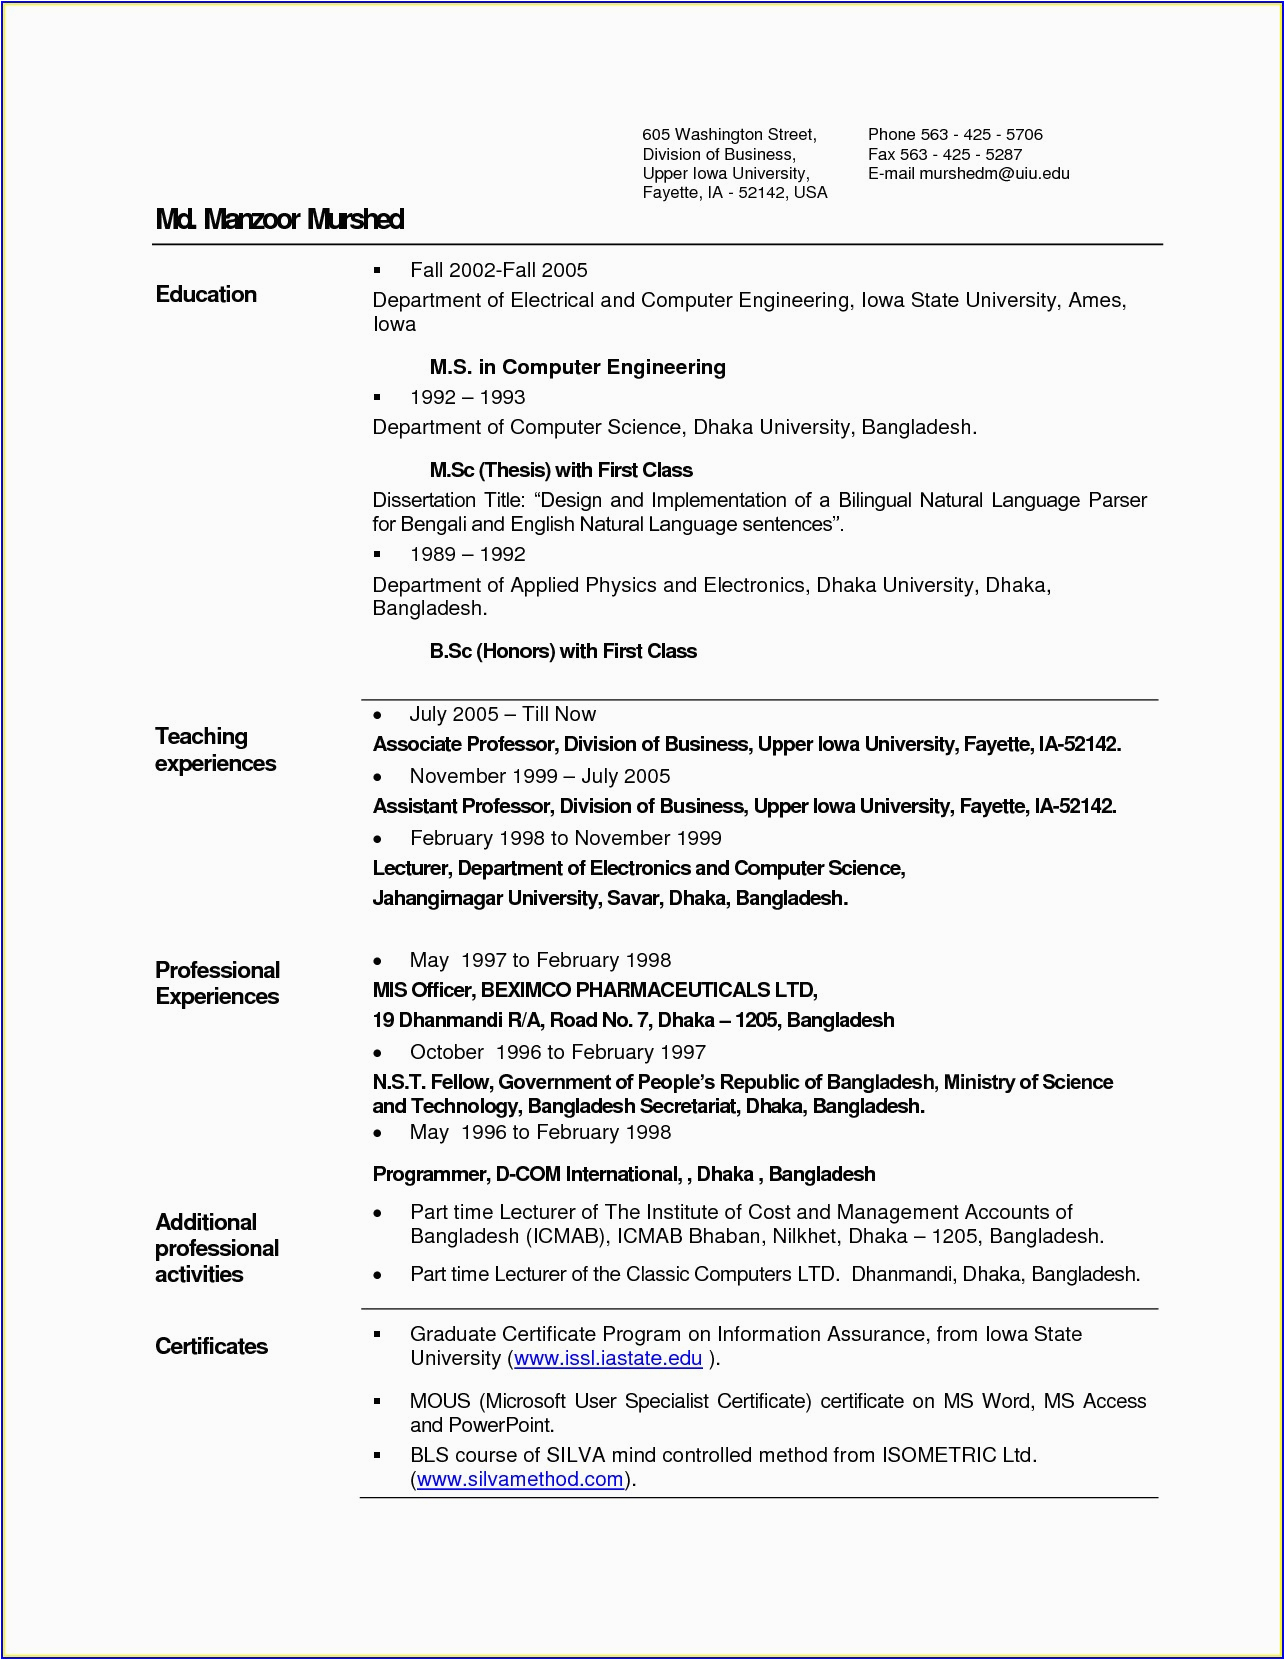 Resume Sample for Freshers Computer Science Engineers Sample Resume for Freshers Engineers Puter Science